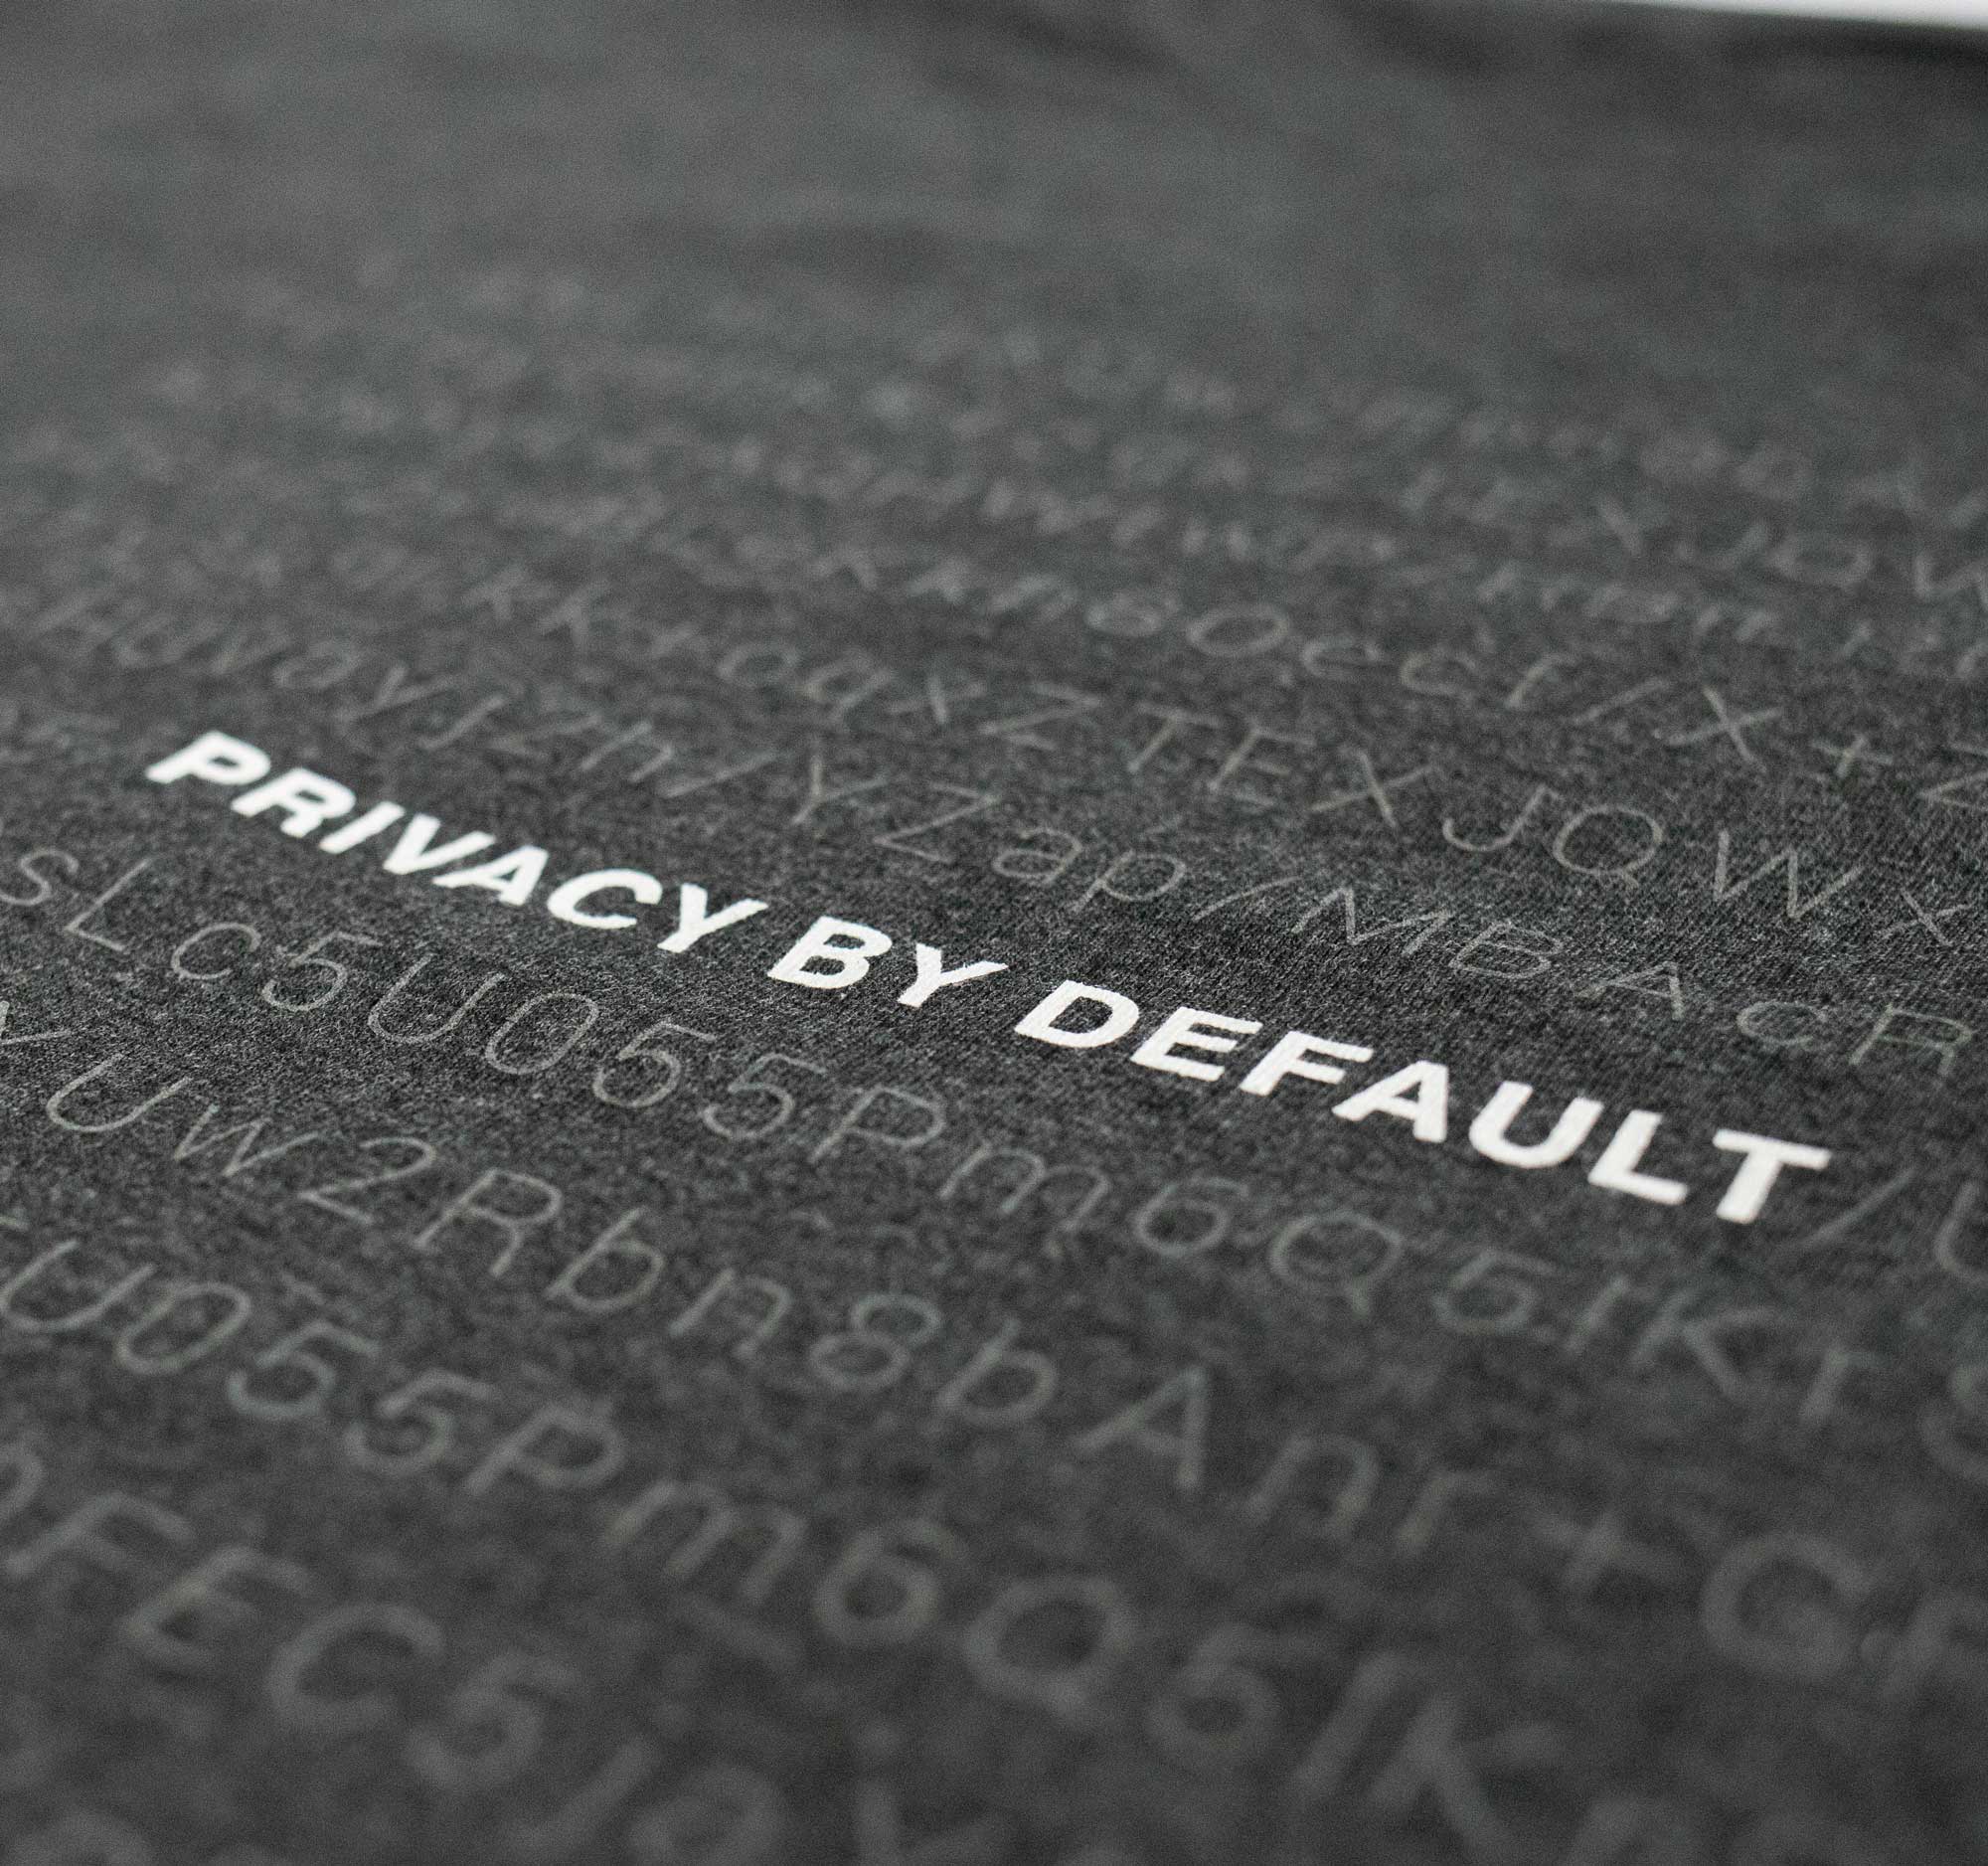 Privacy by Default T-shirt